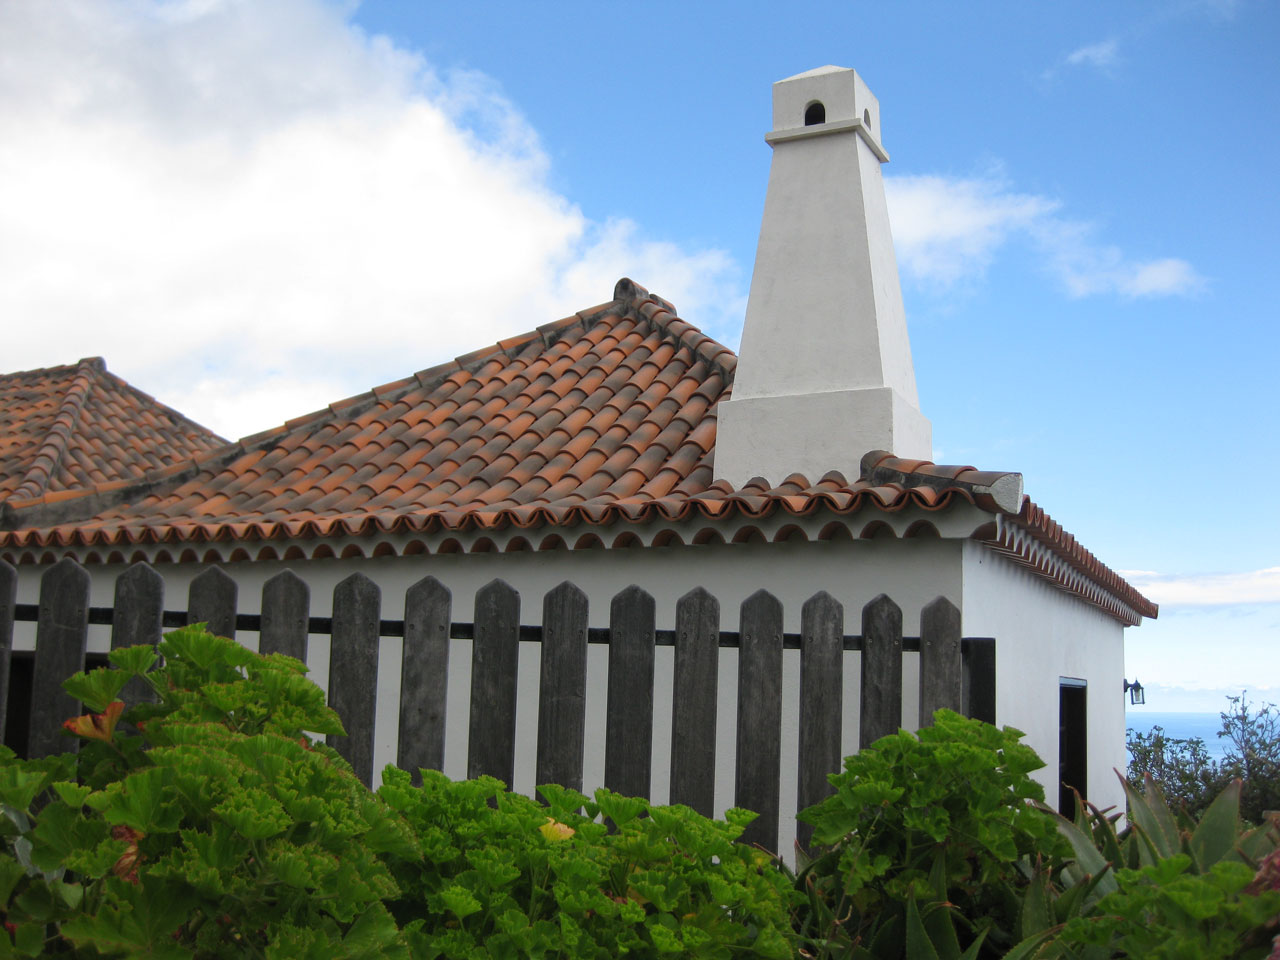 Typical La Palma house with an unusual chimney